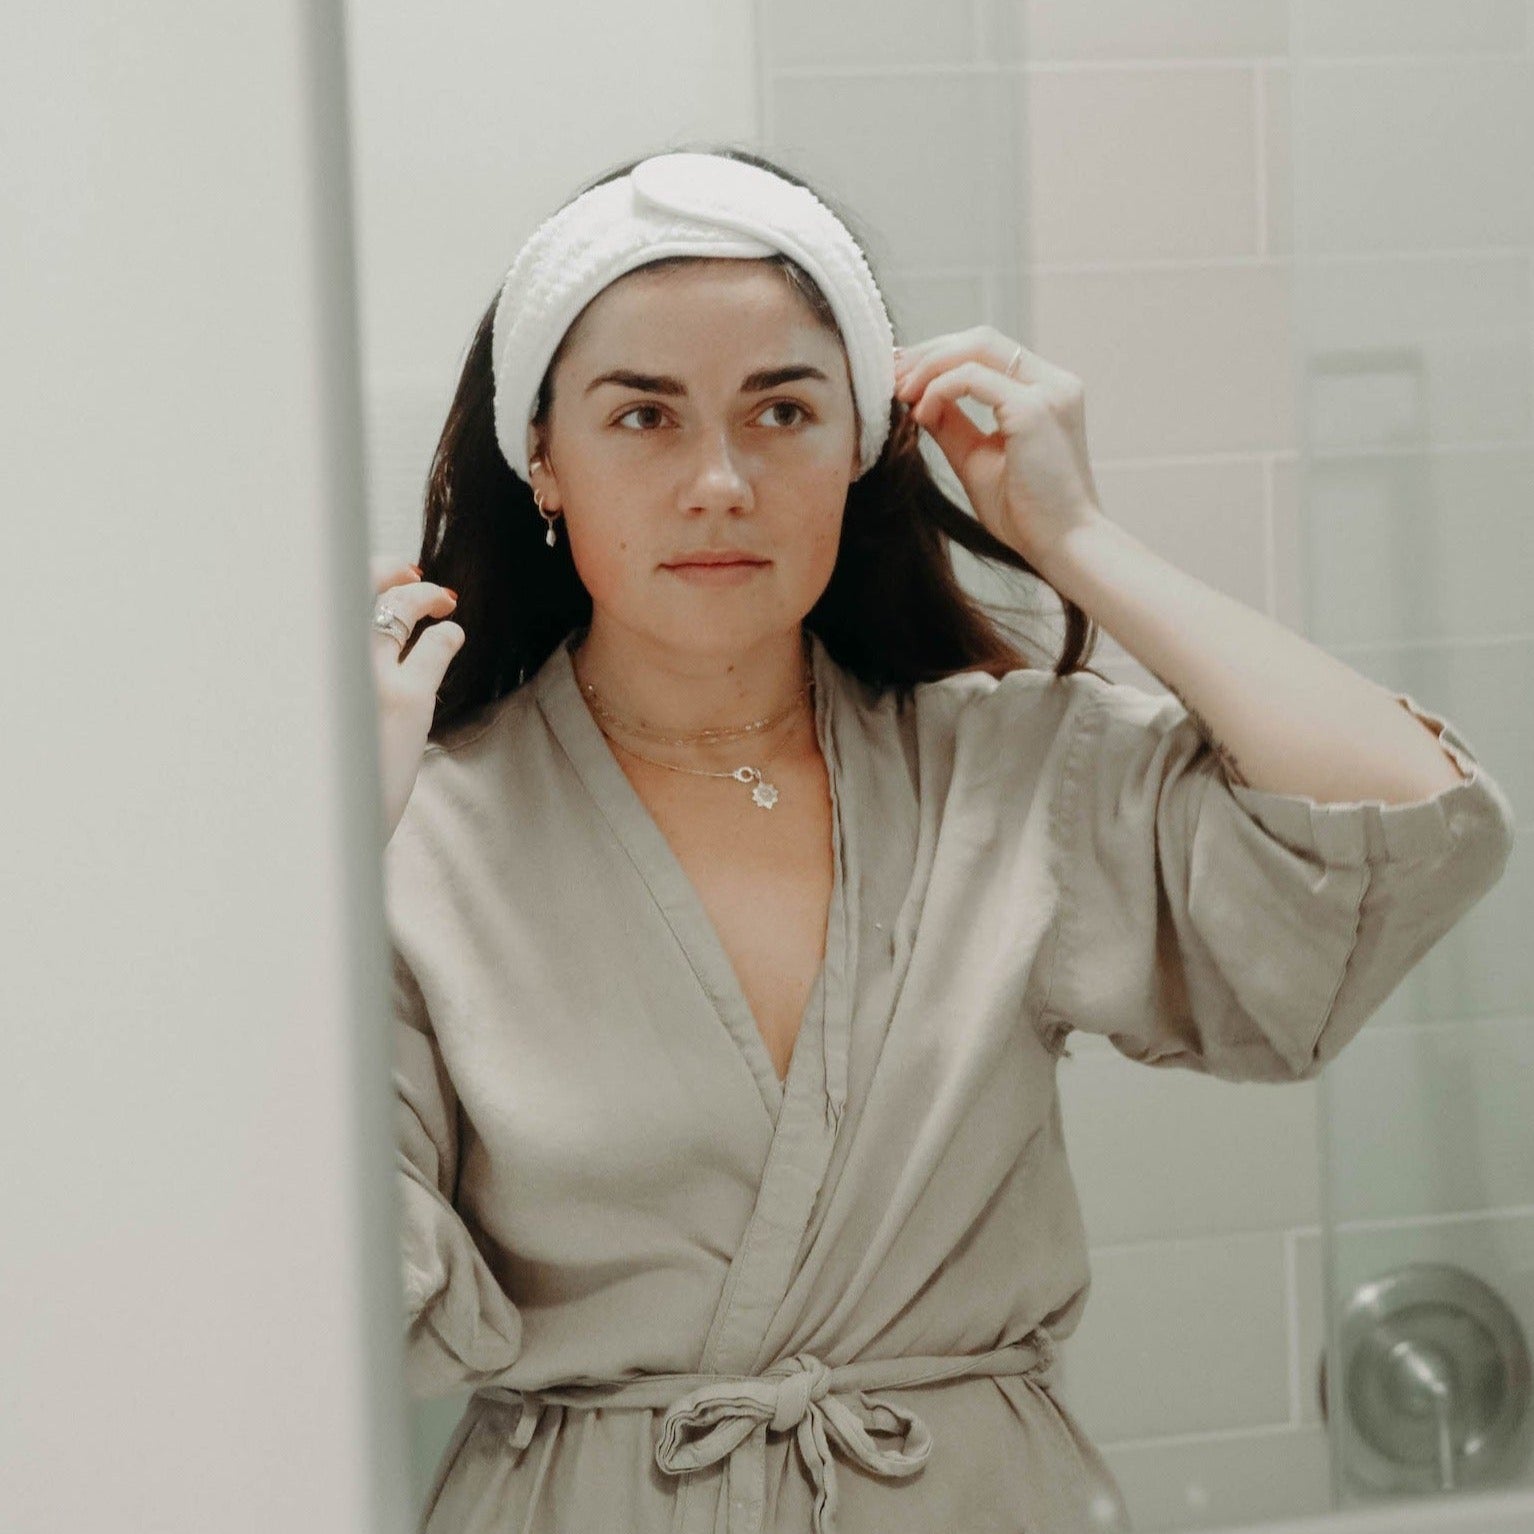 A woman with dark brown hair wearing a white plush spa headband and an oatmeal colored robe while she looks in the mirror.